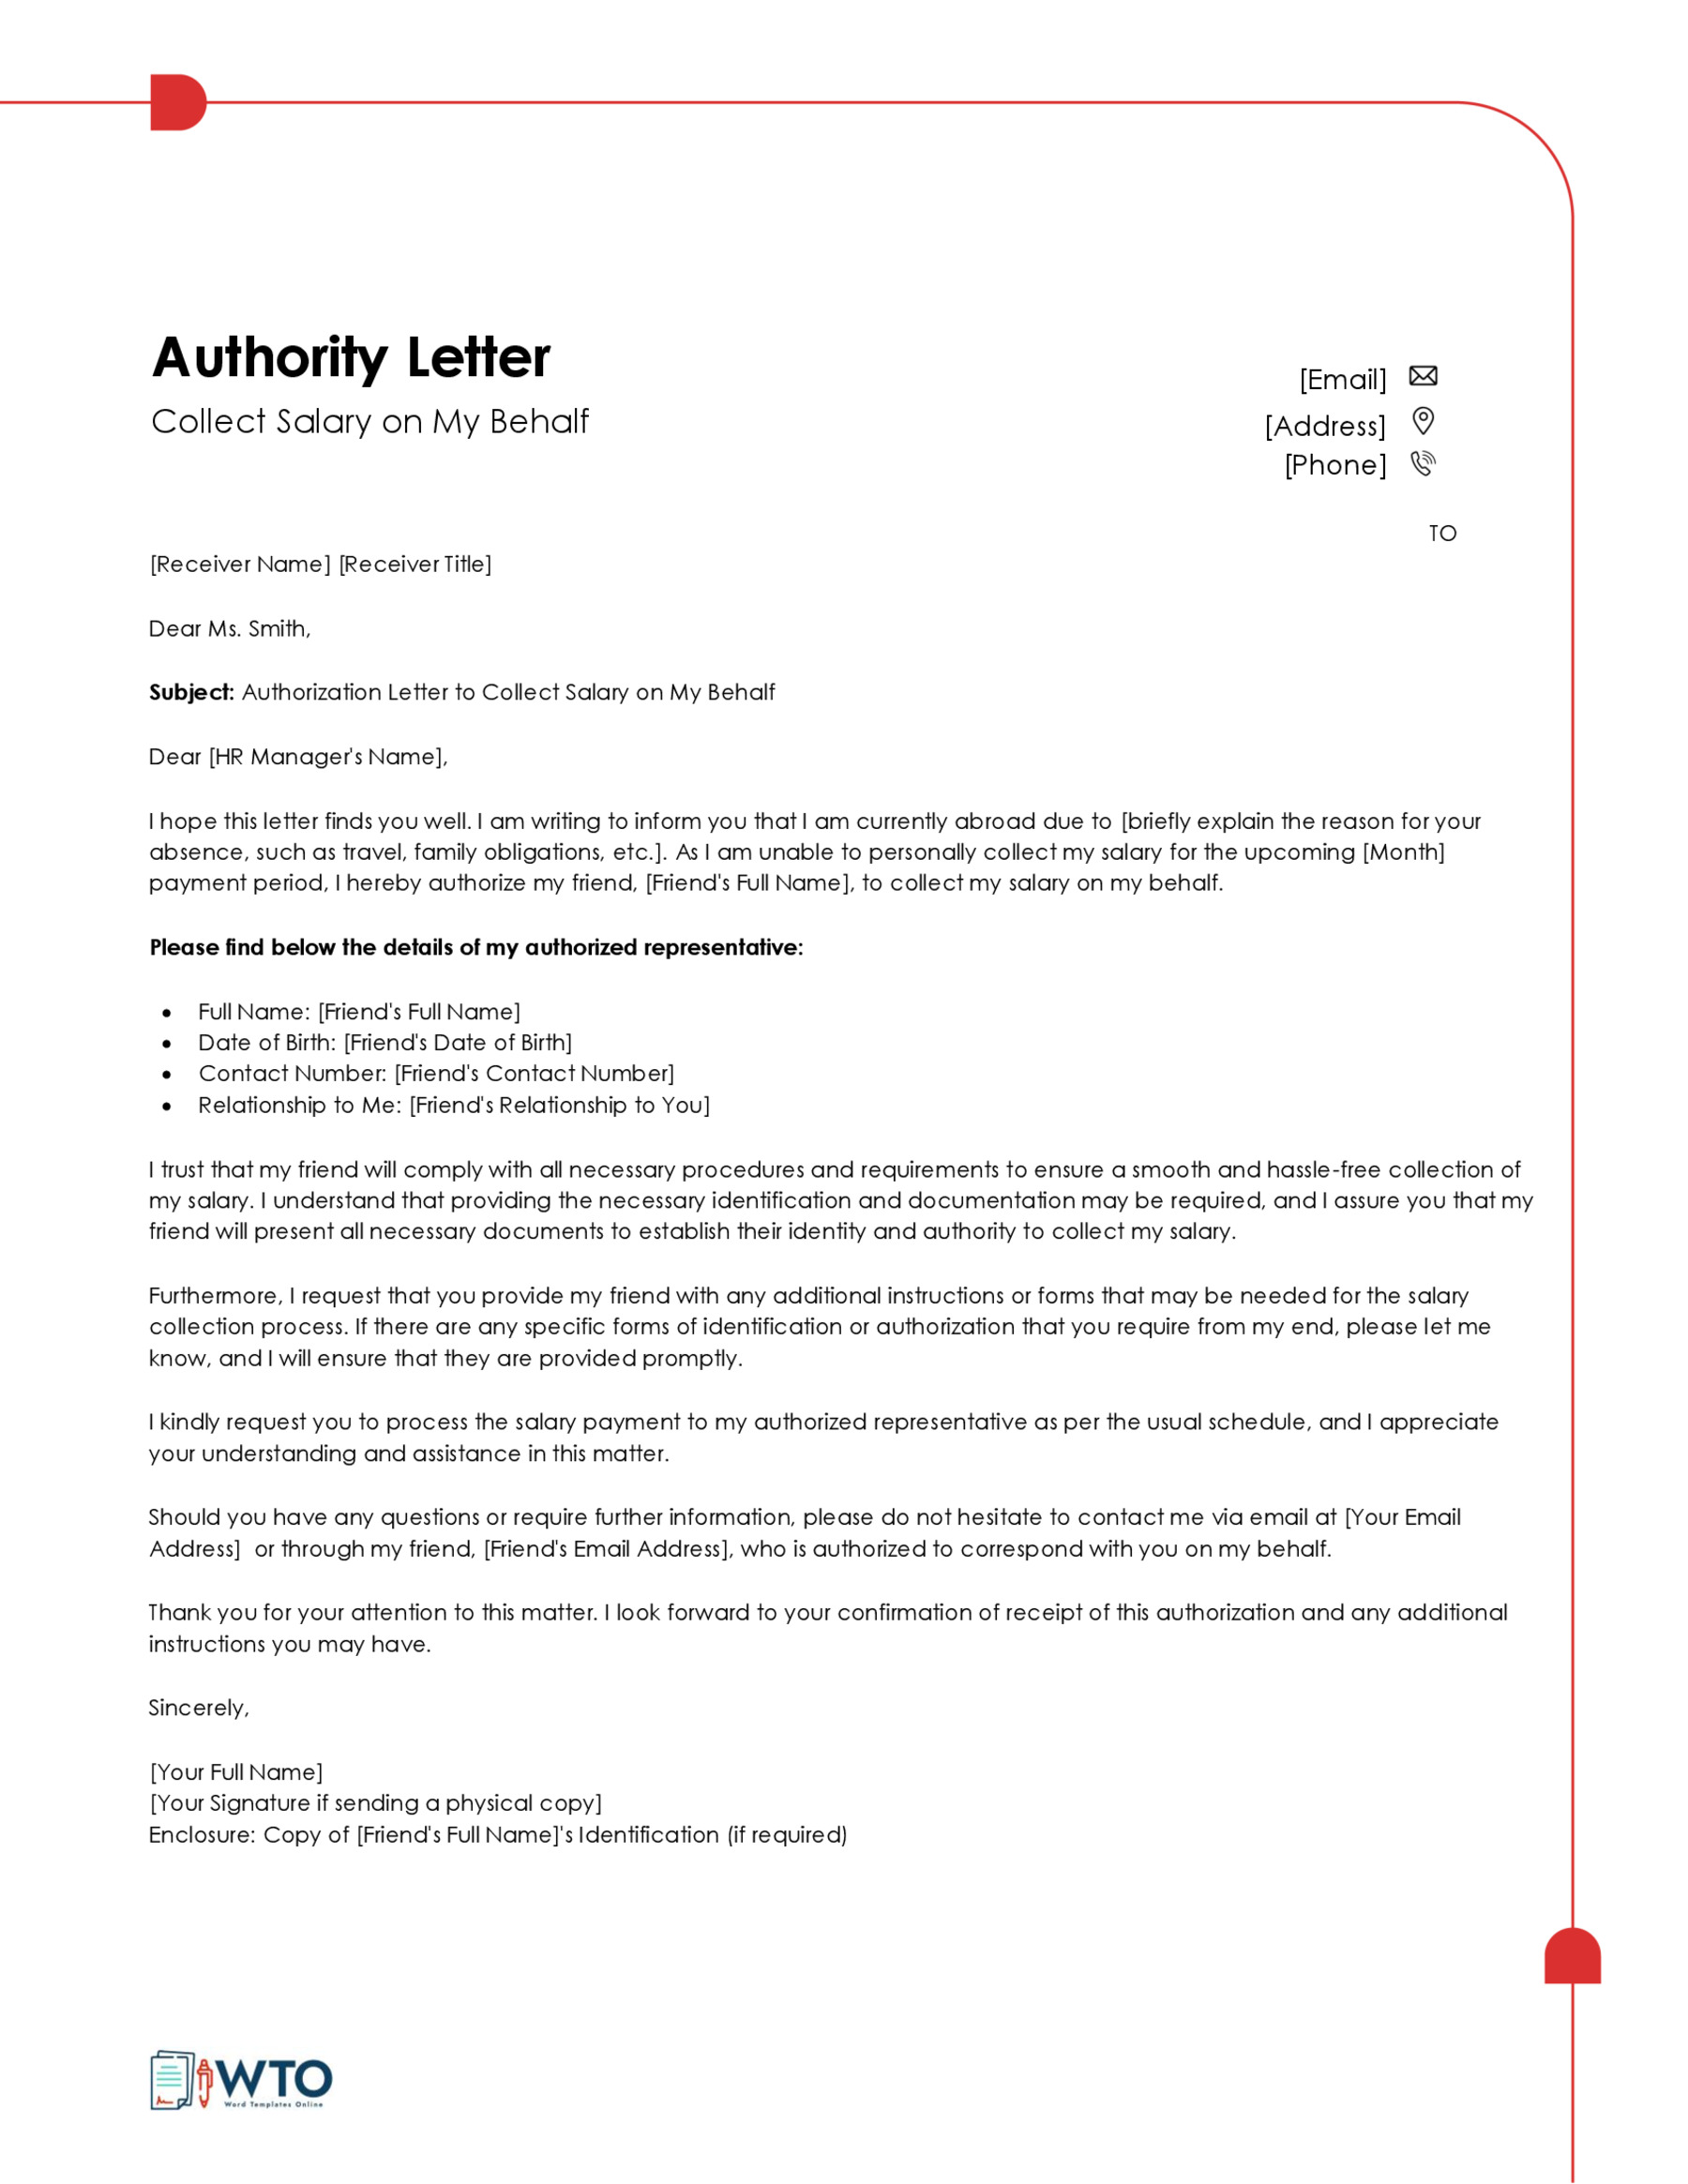 Authorization Letter to Collect Salary Template-Ms word Format